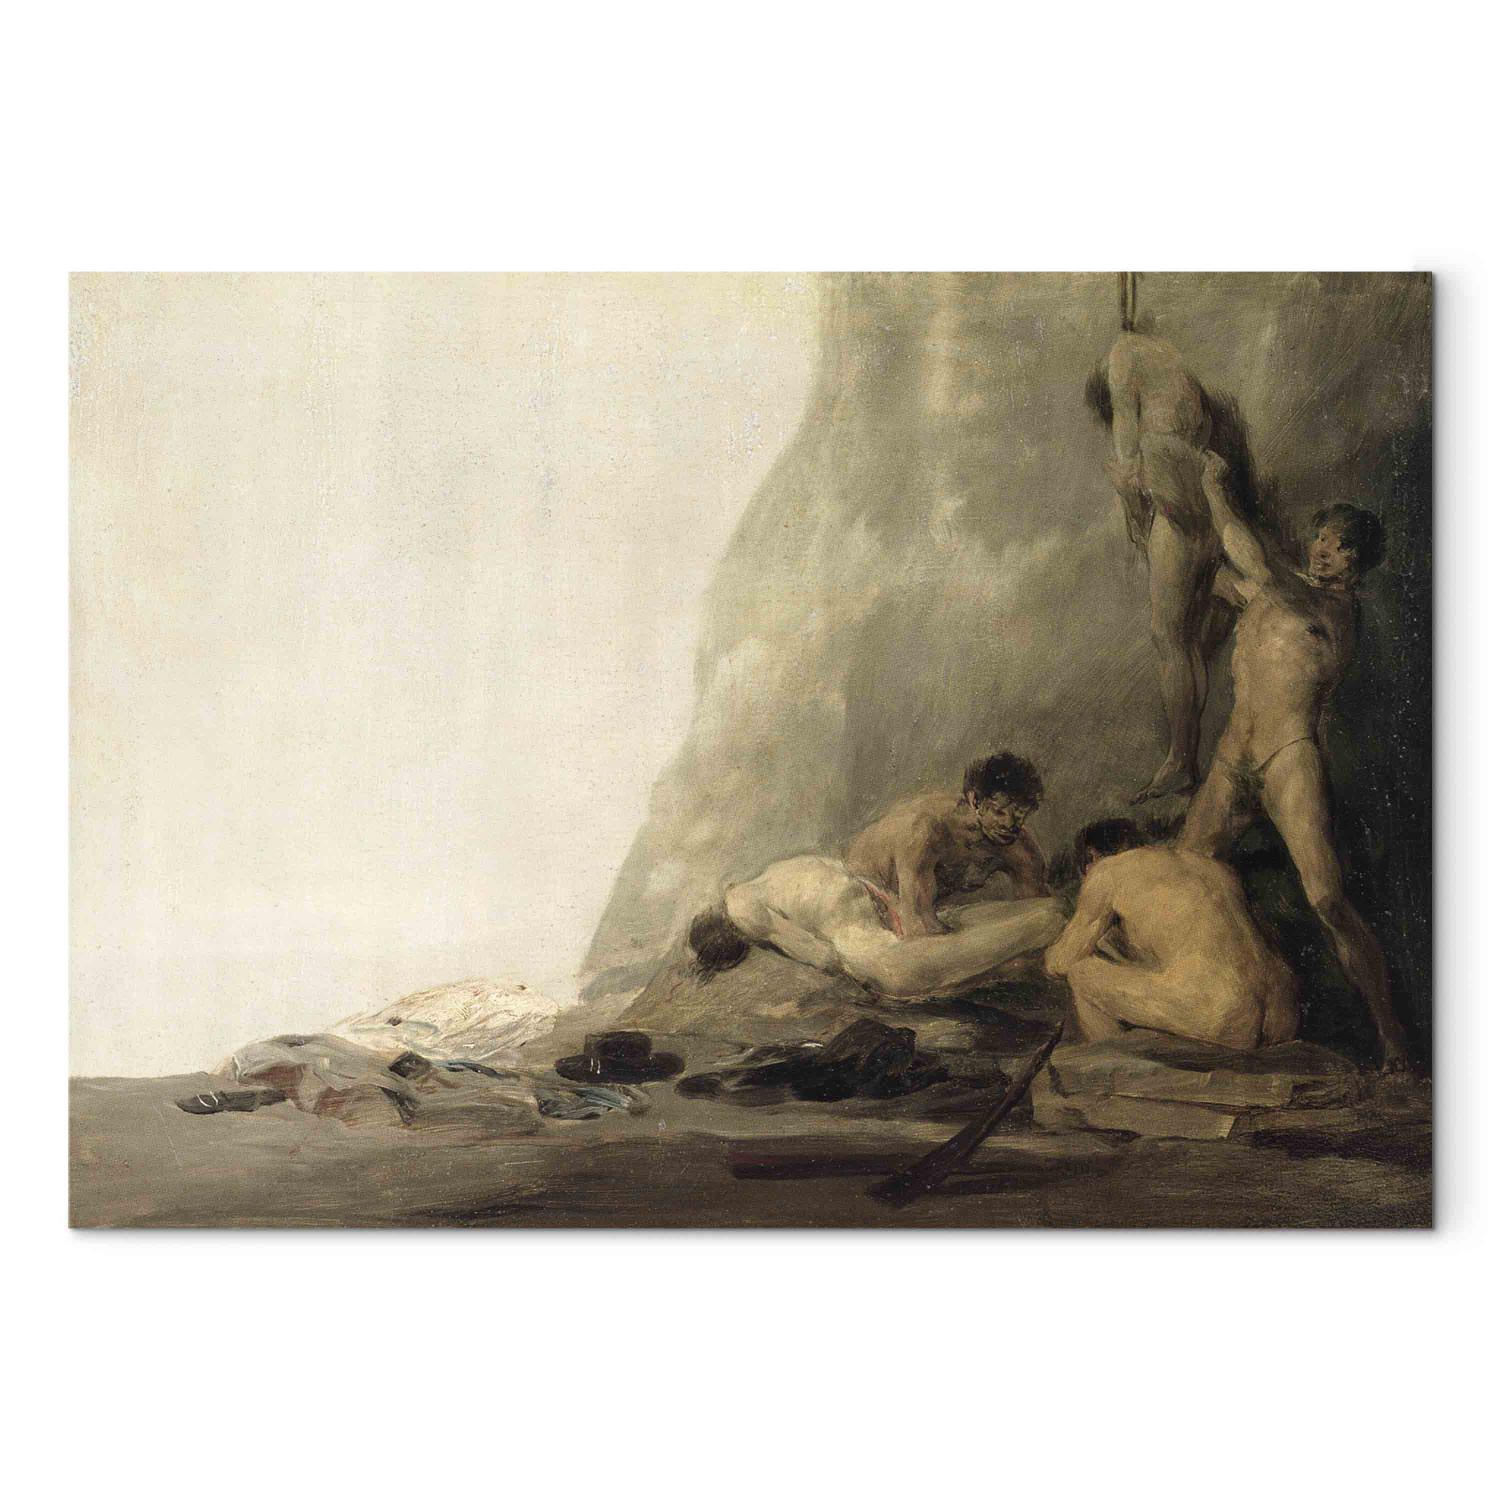 Cuadro famoso Cannibals Preparing their Victims, or The Bodies of Jean de Brebeuf and Gabriel Lallemant being skinned by the Iroquois in